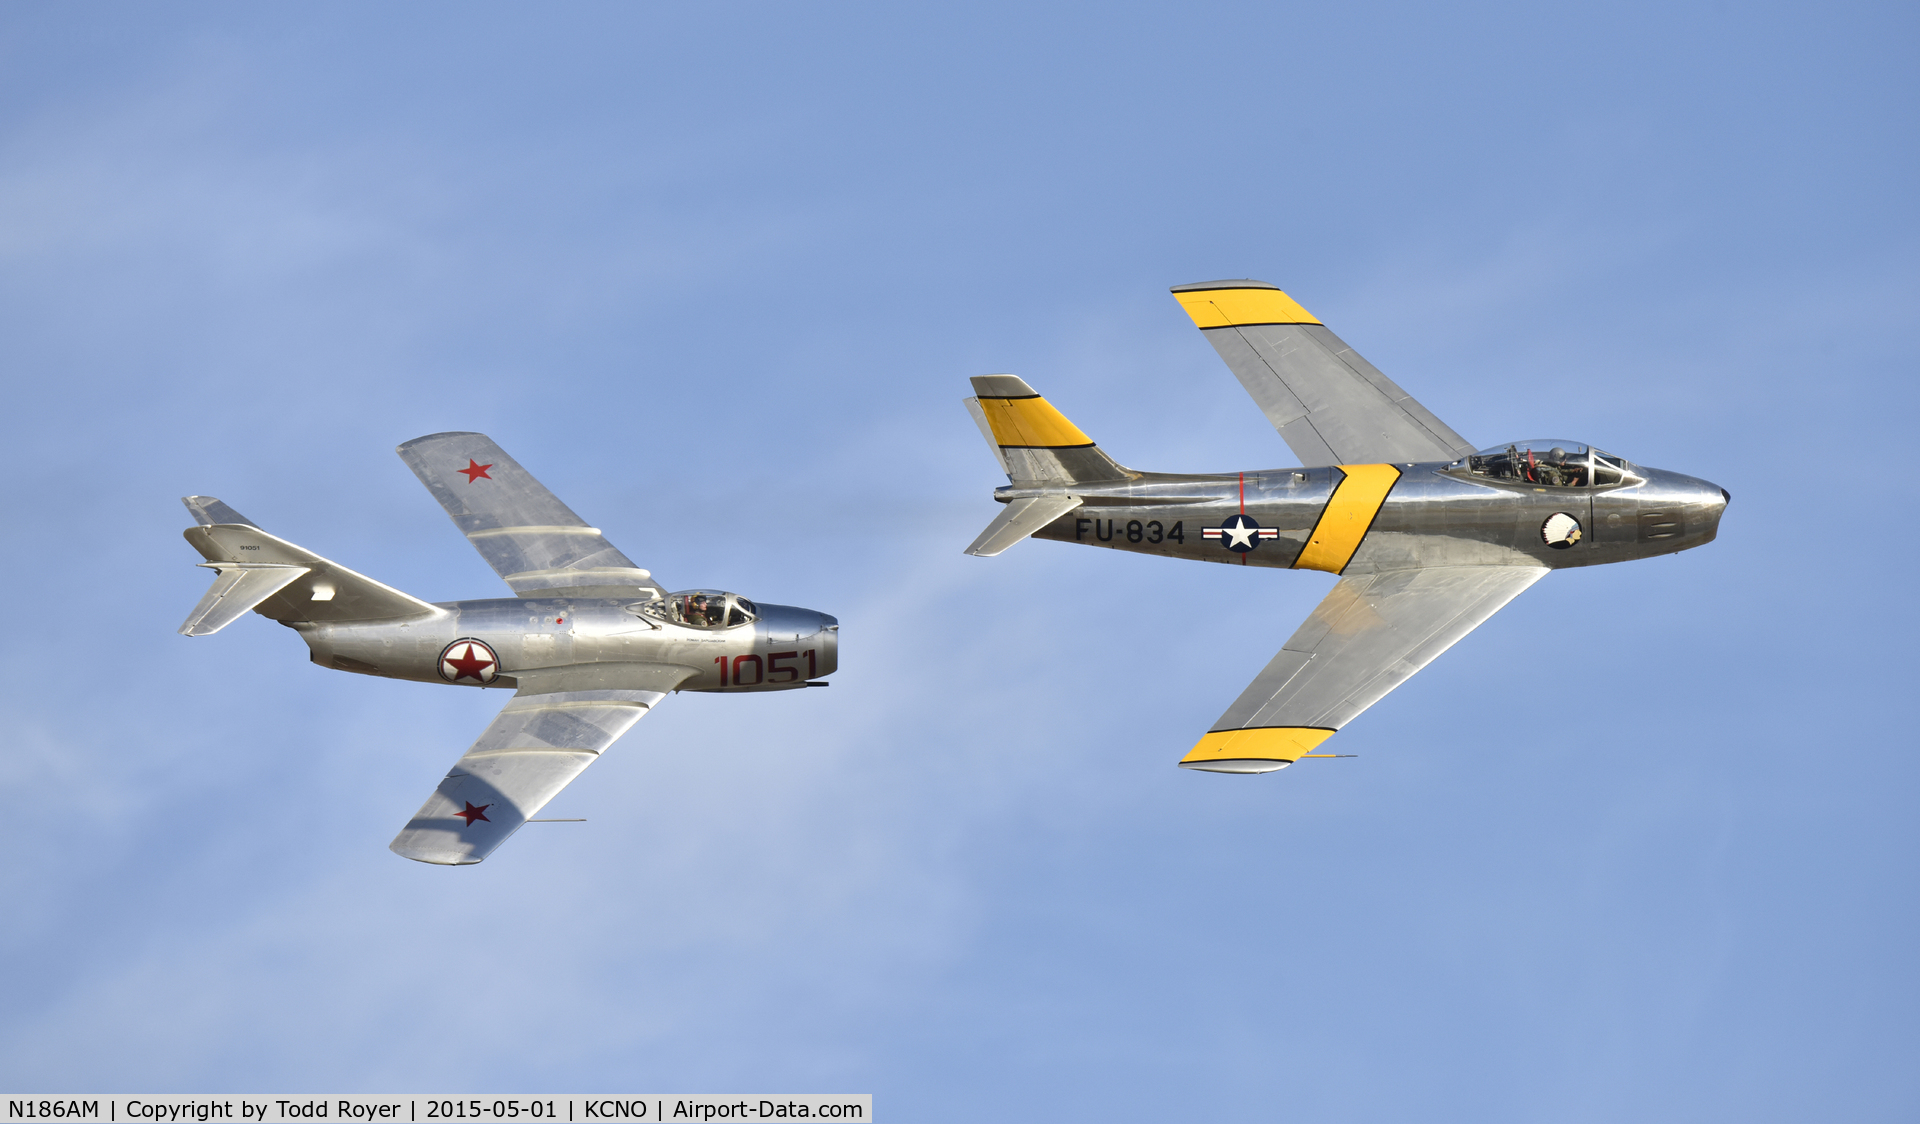 N186AM, 1952 North American F-86F Sabre C/N 191-708, Flying at the 2015 Planes of Fame Airshow